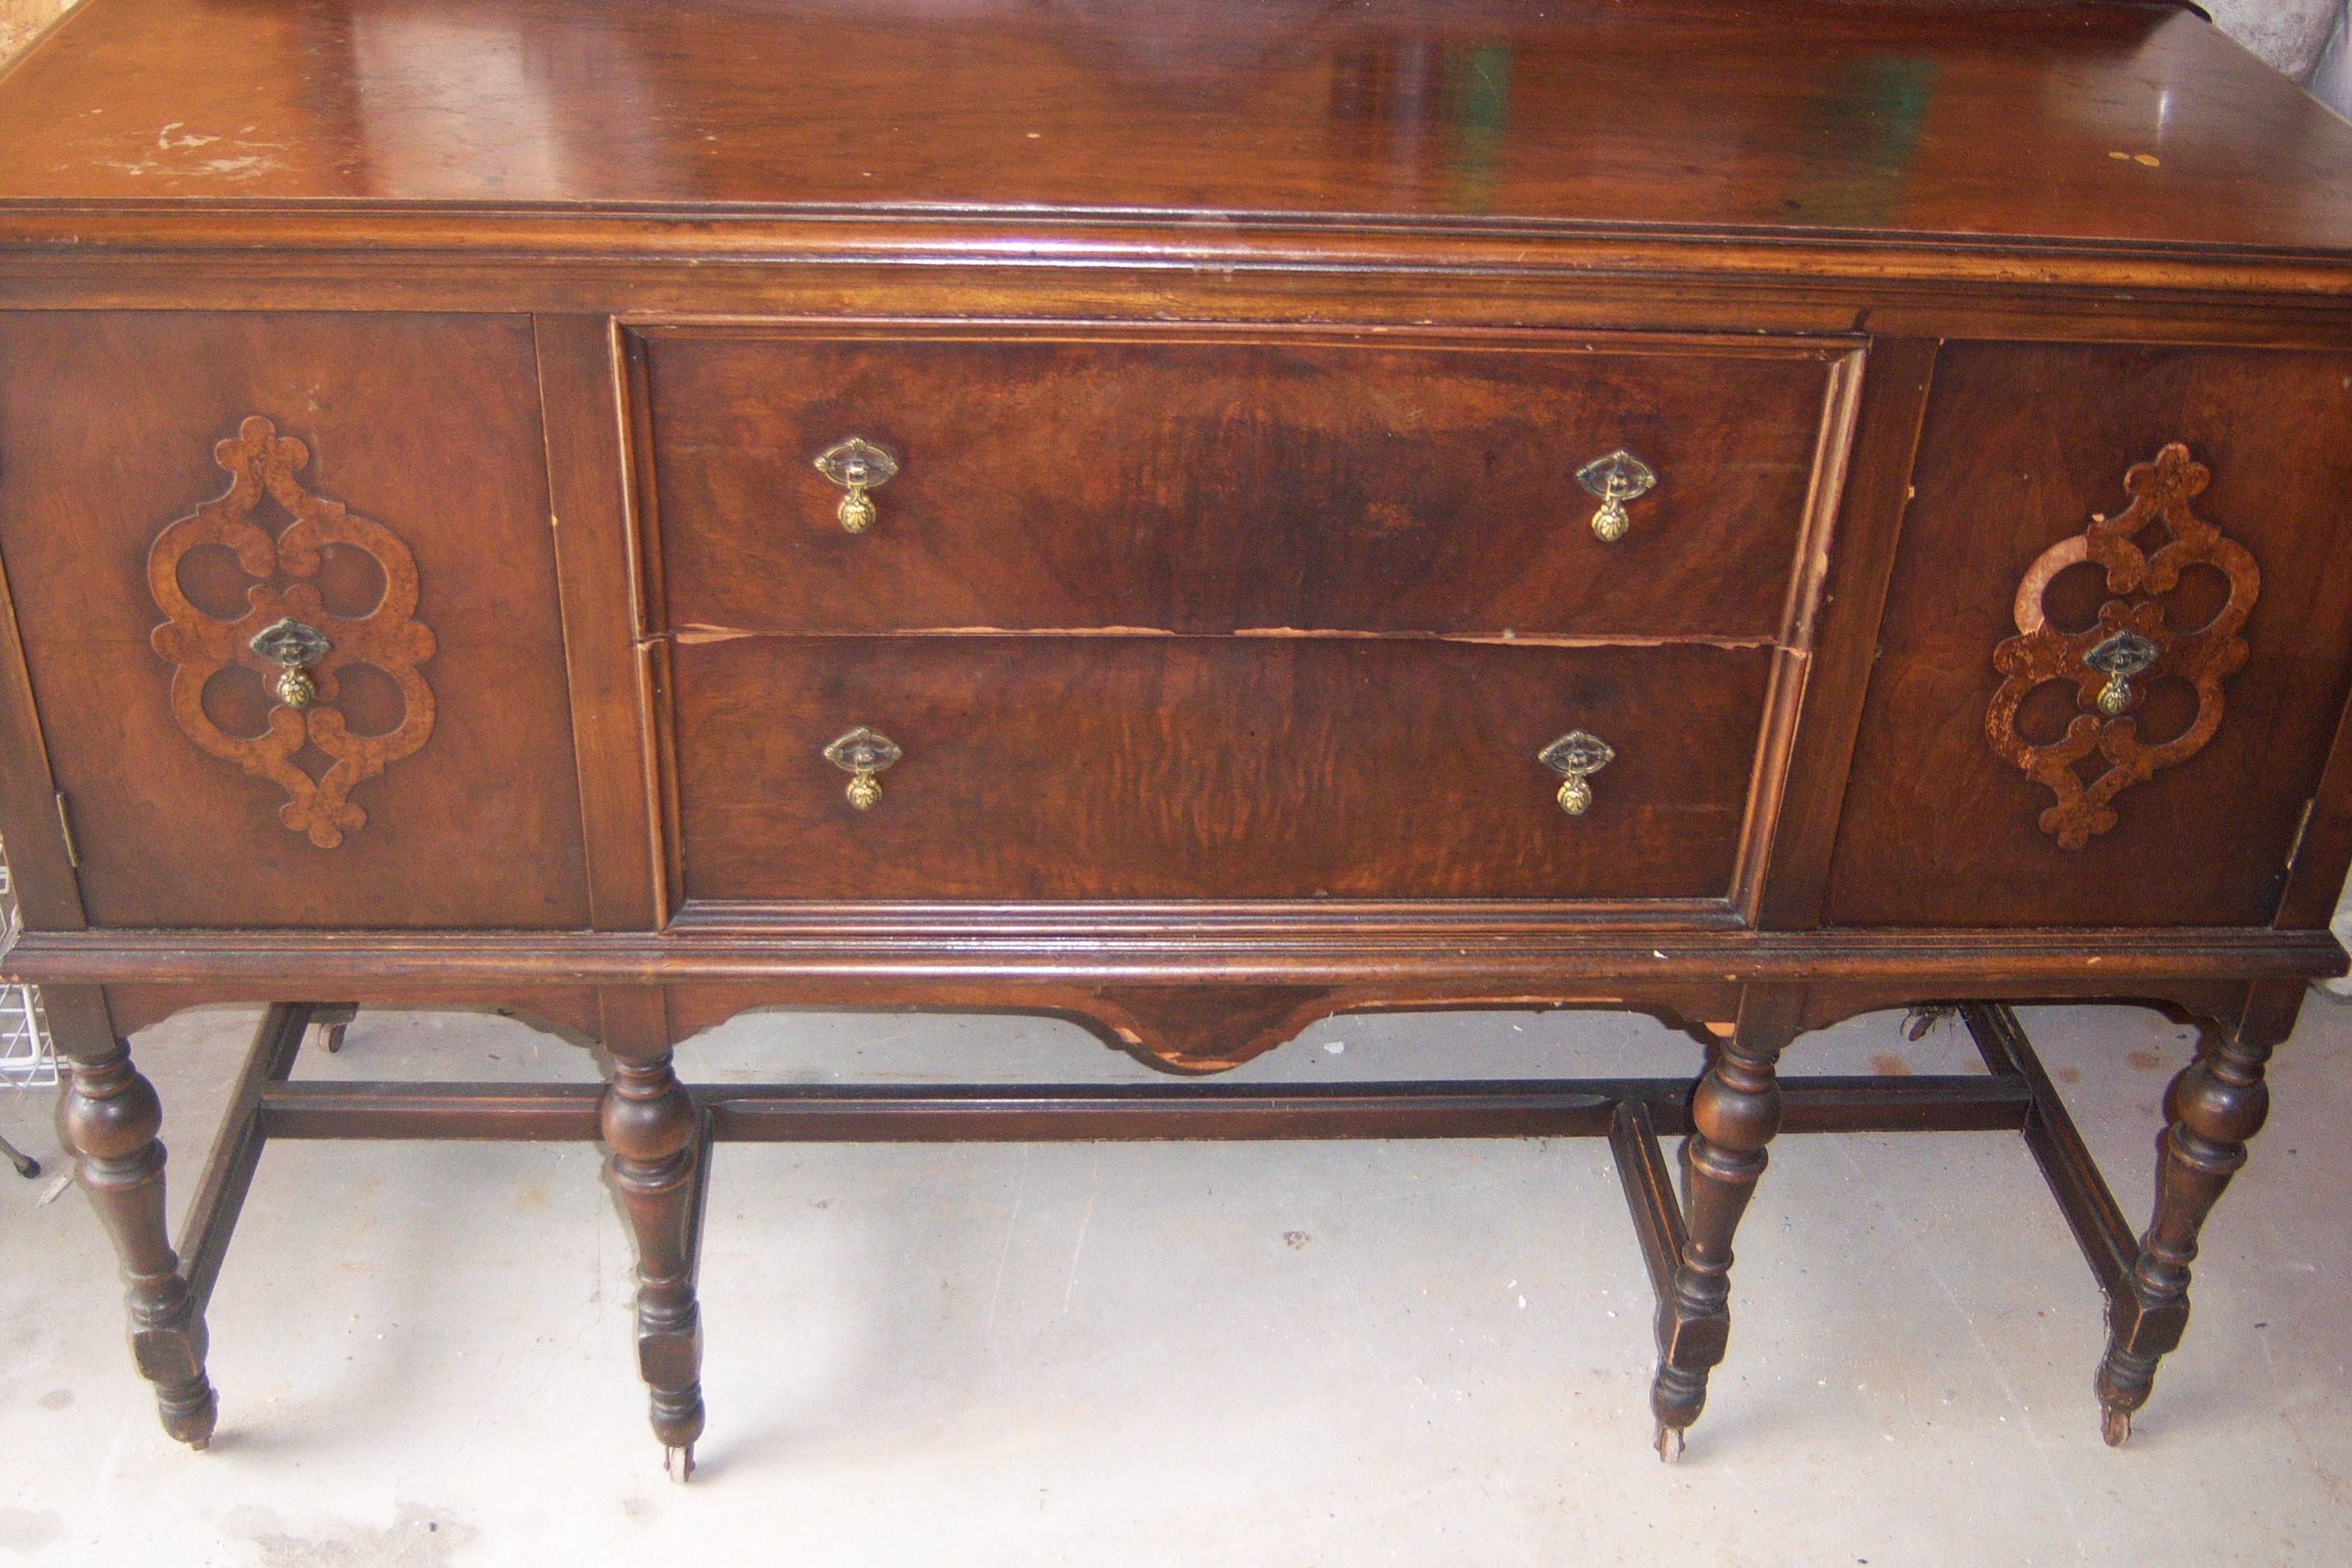 Beautiful Antique Sideboards And Buffets – Bjdgjy With Regard To Antique Sideboards And Buffets (View 2 of 15)